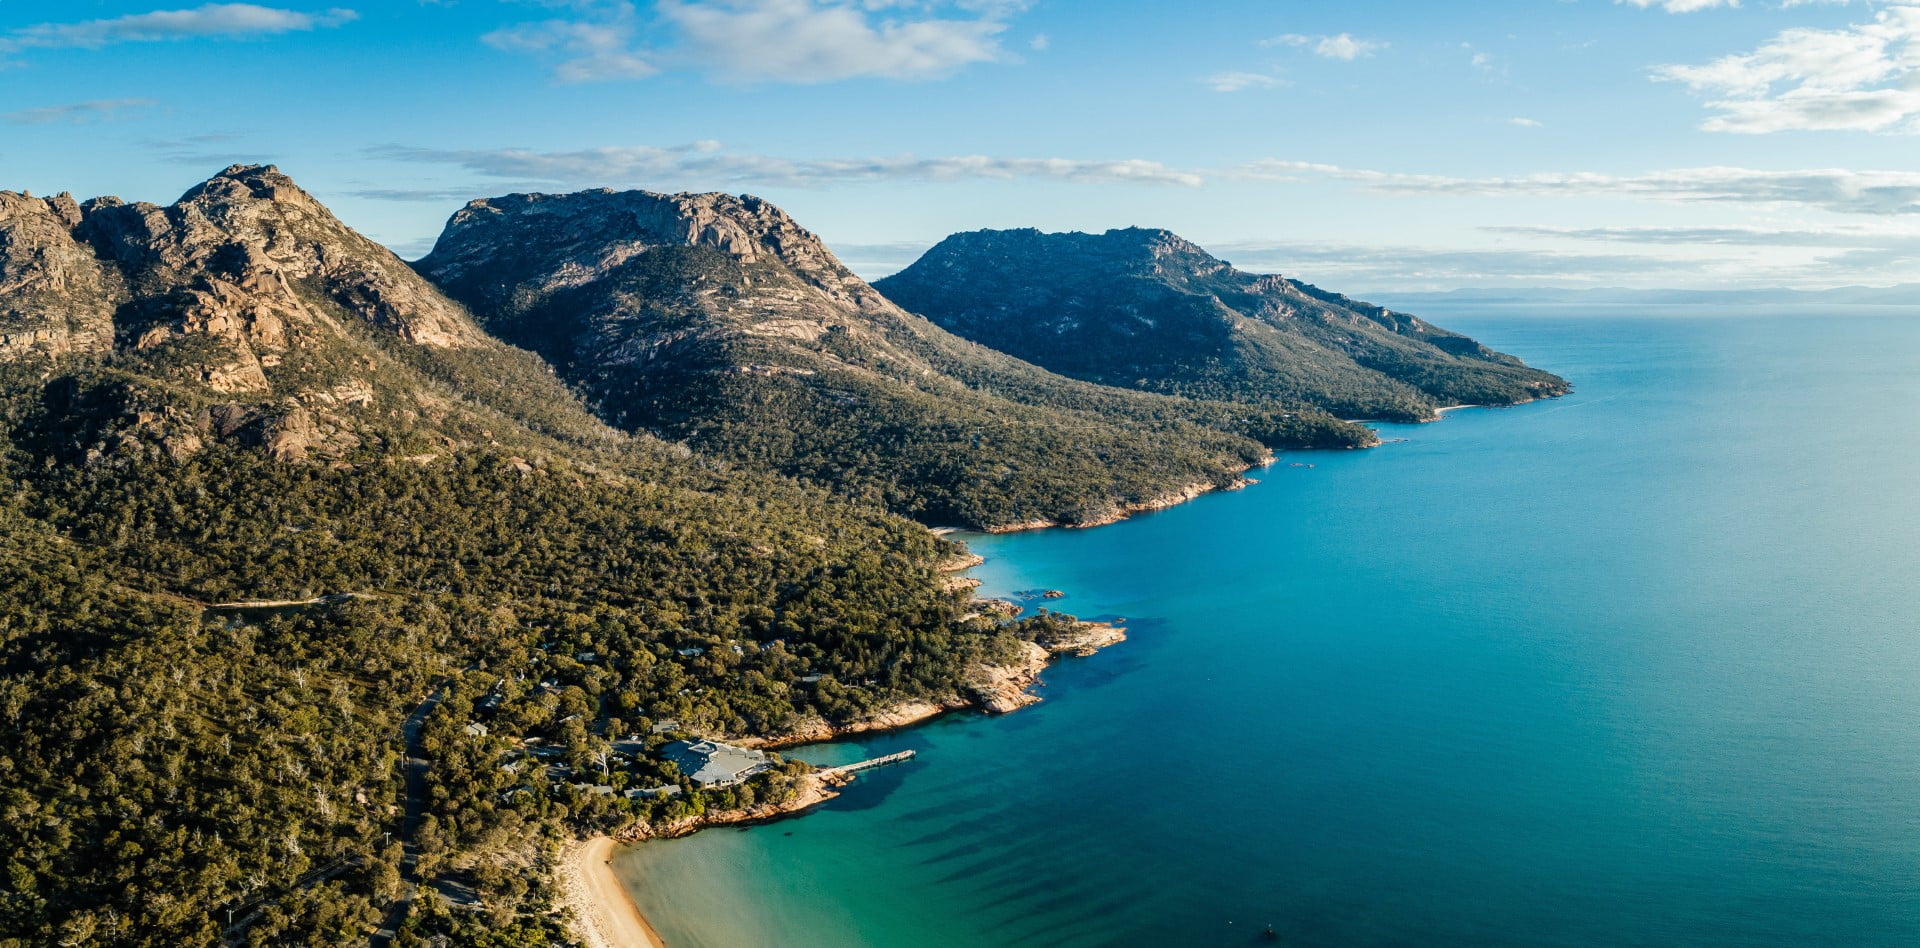 Freycinet Lodge, nestled into the bushland, sea to the south and mountains to the north.